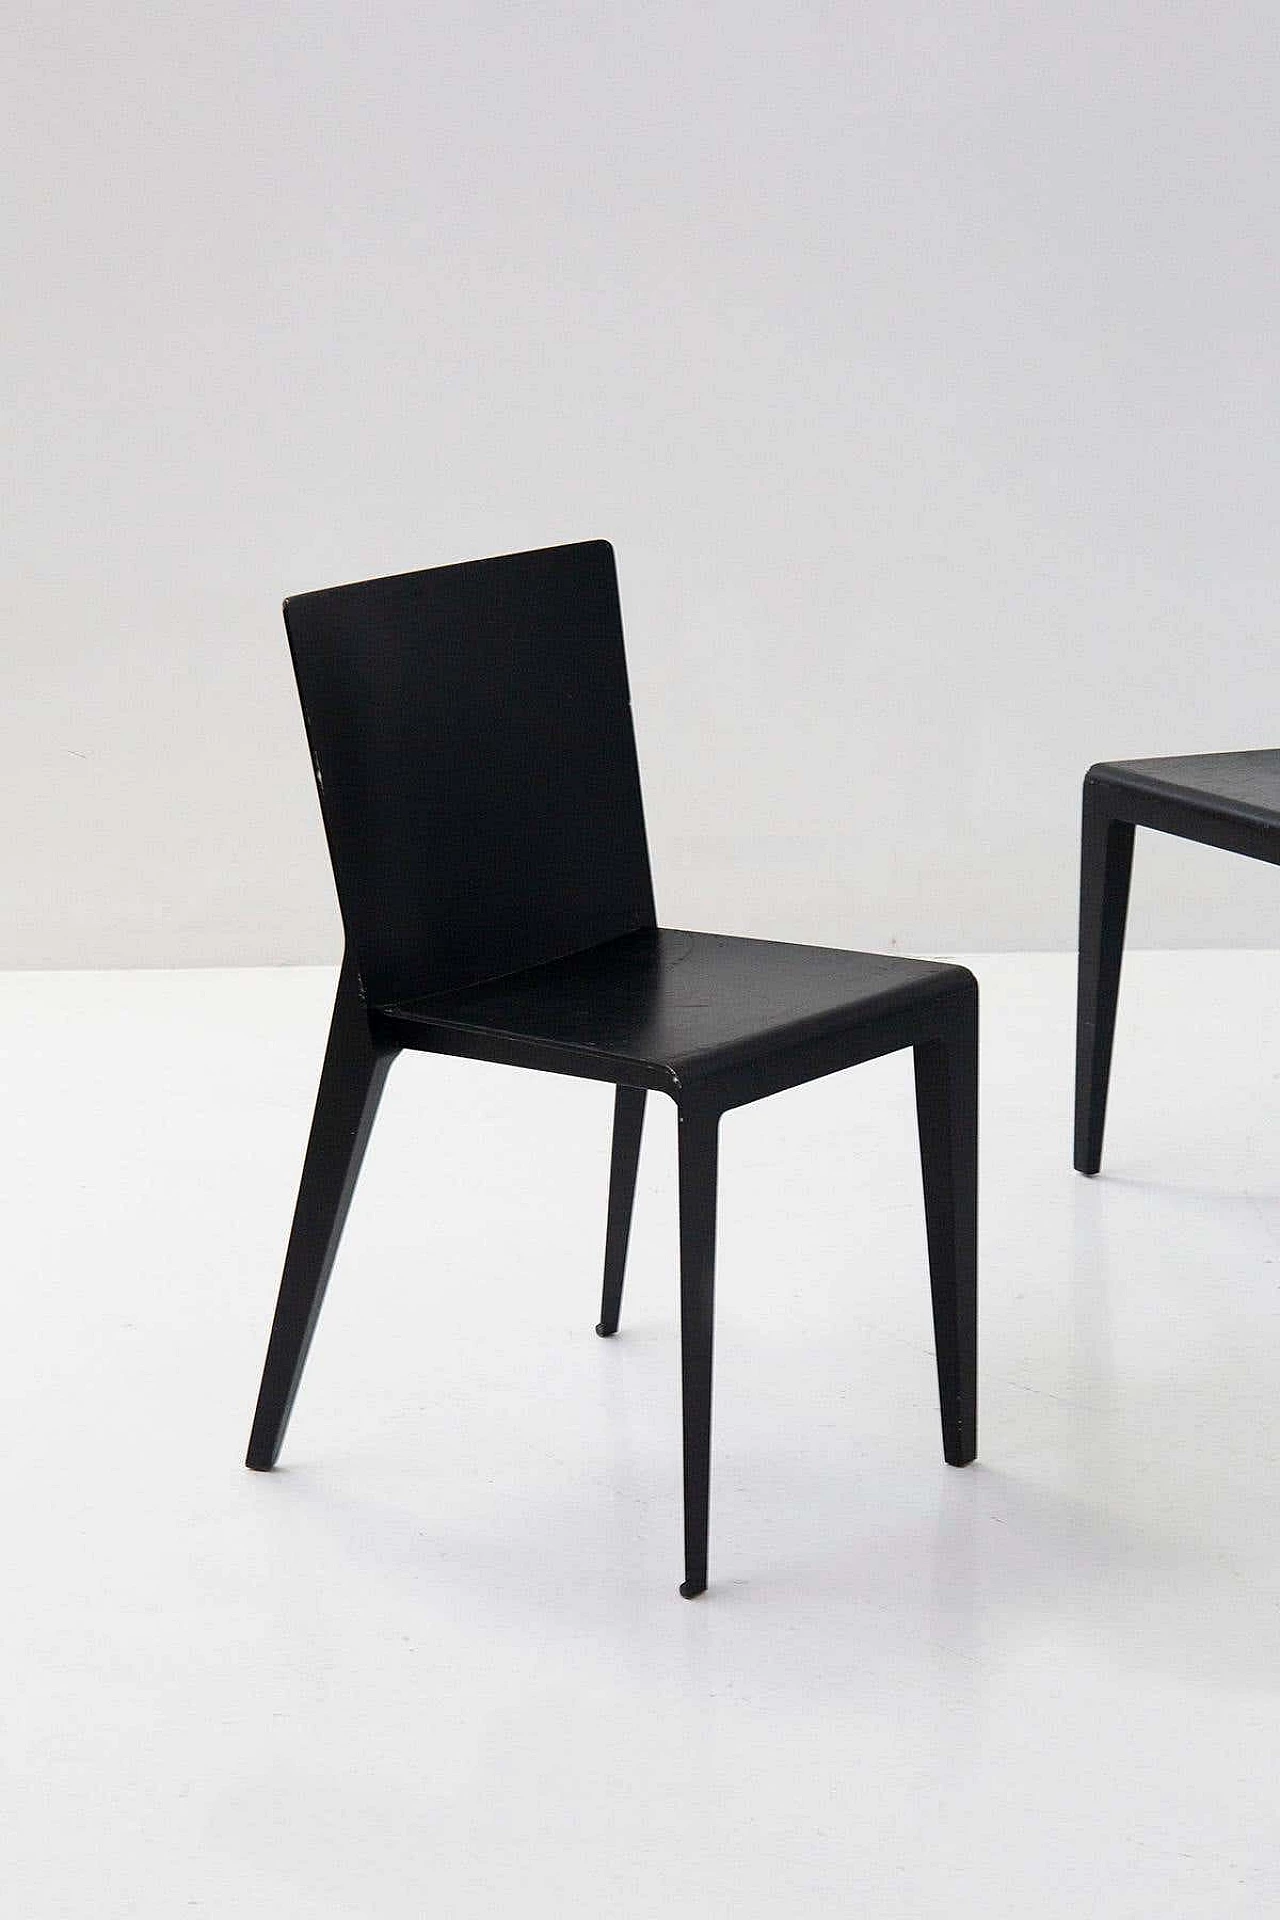 5 Alfa chairs by Hannes Wettstein for Molteni, 2001 3